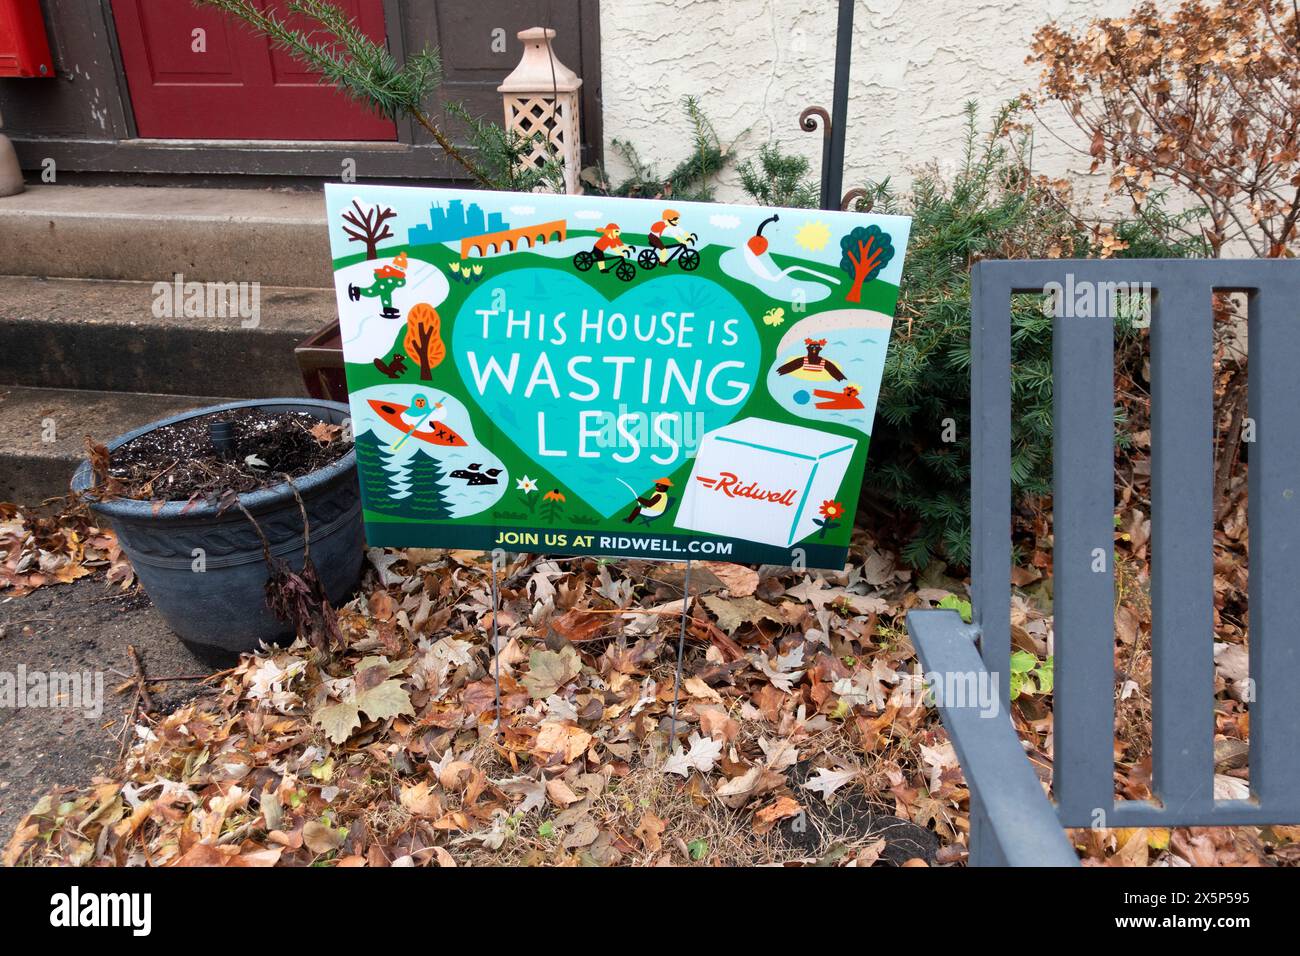 House advertising their recycling efforts and proud of it. Minneapolis Minnesota MN USA Stock Photo